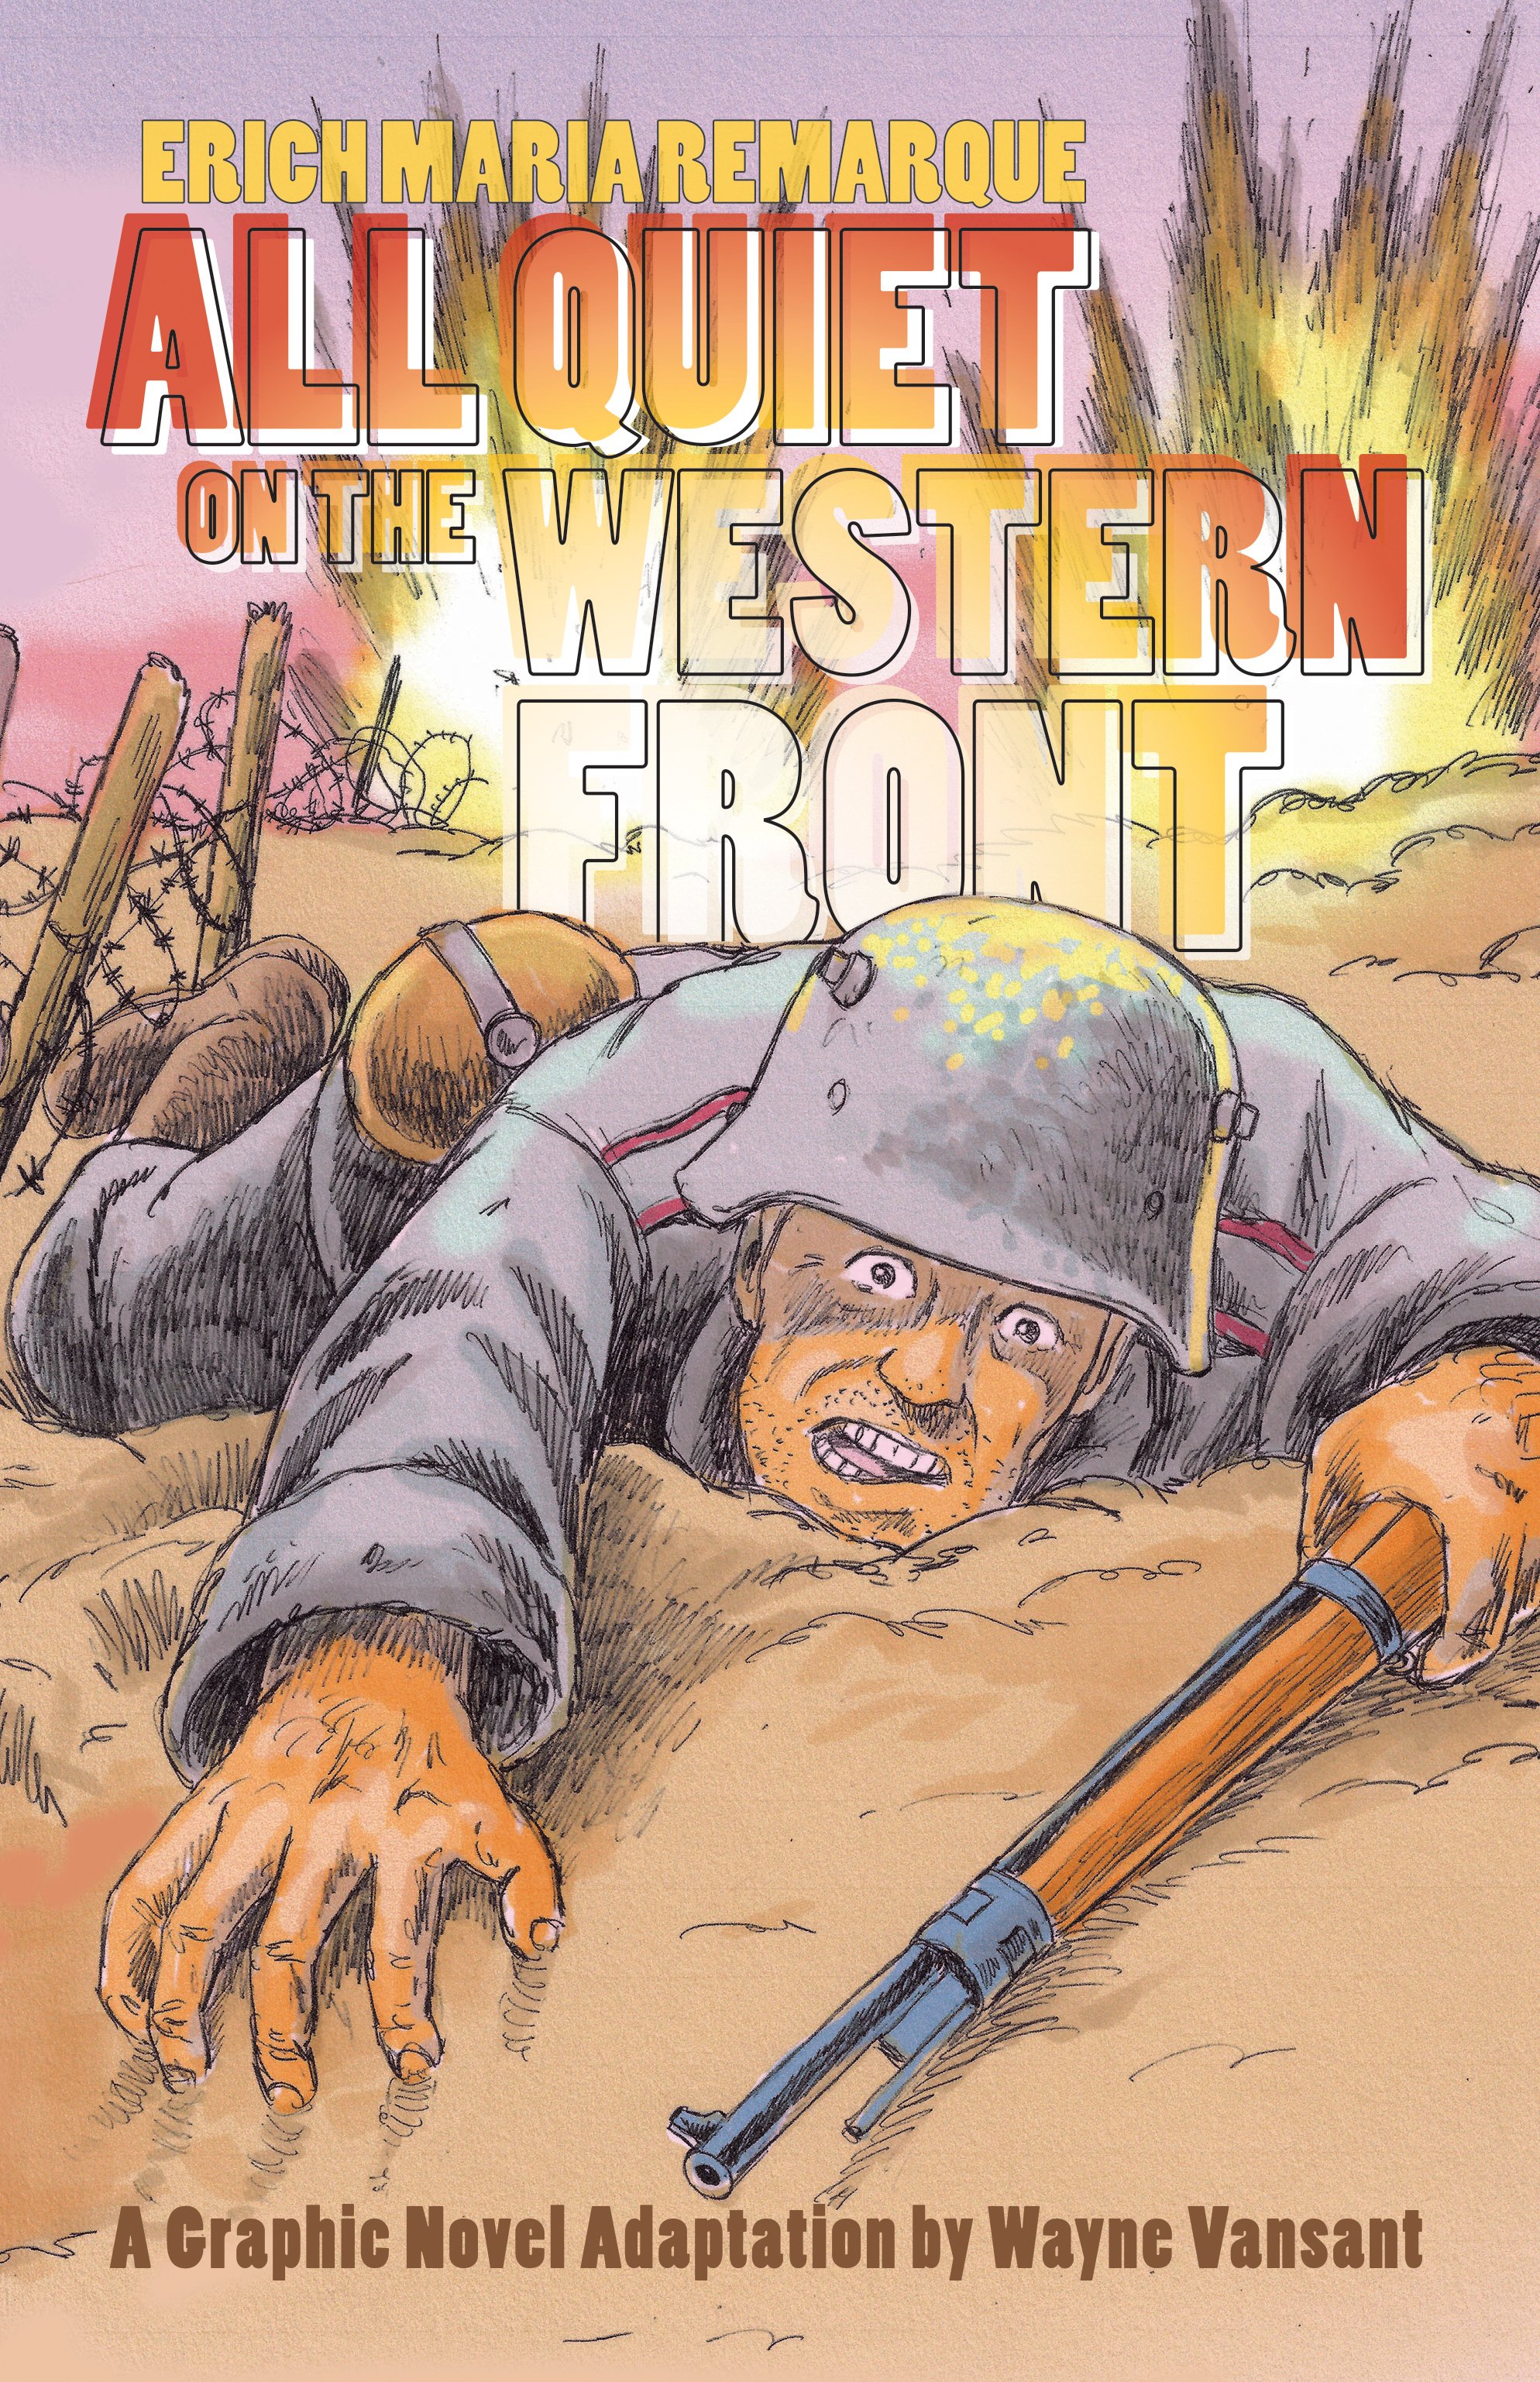 Explained: Why All Quiet on the Western Front is one of the great